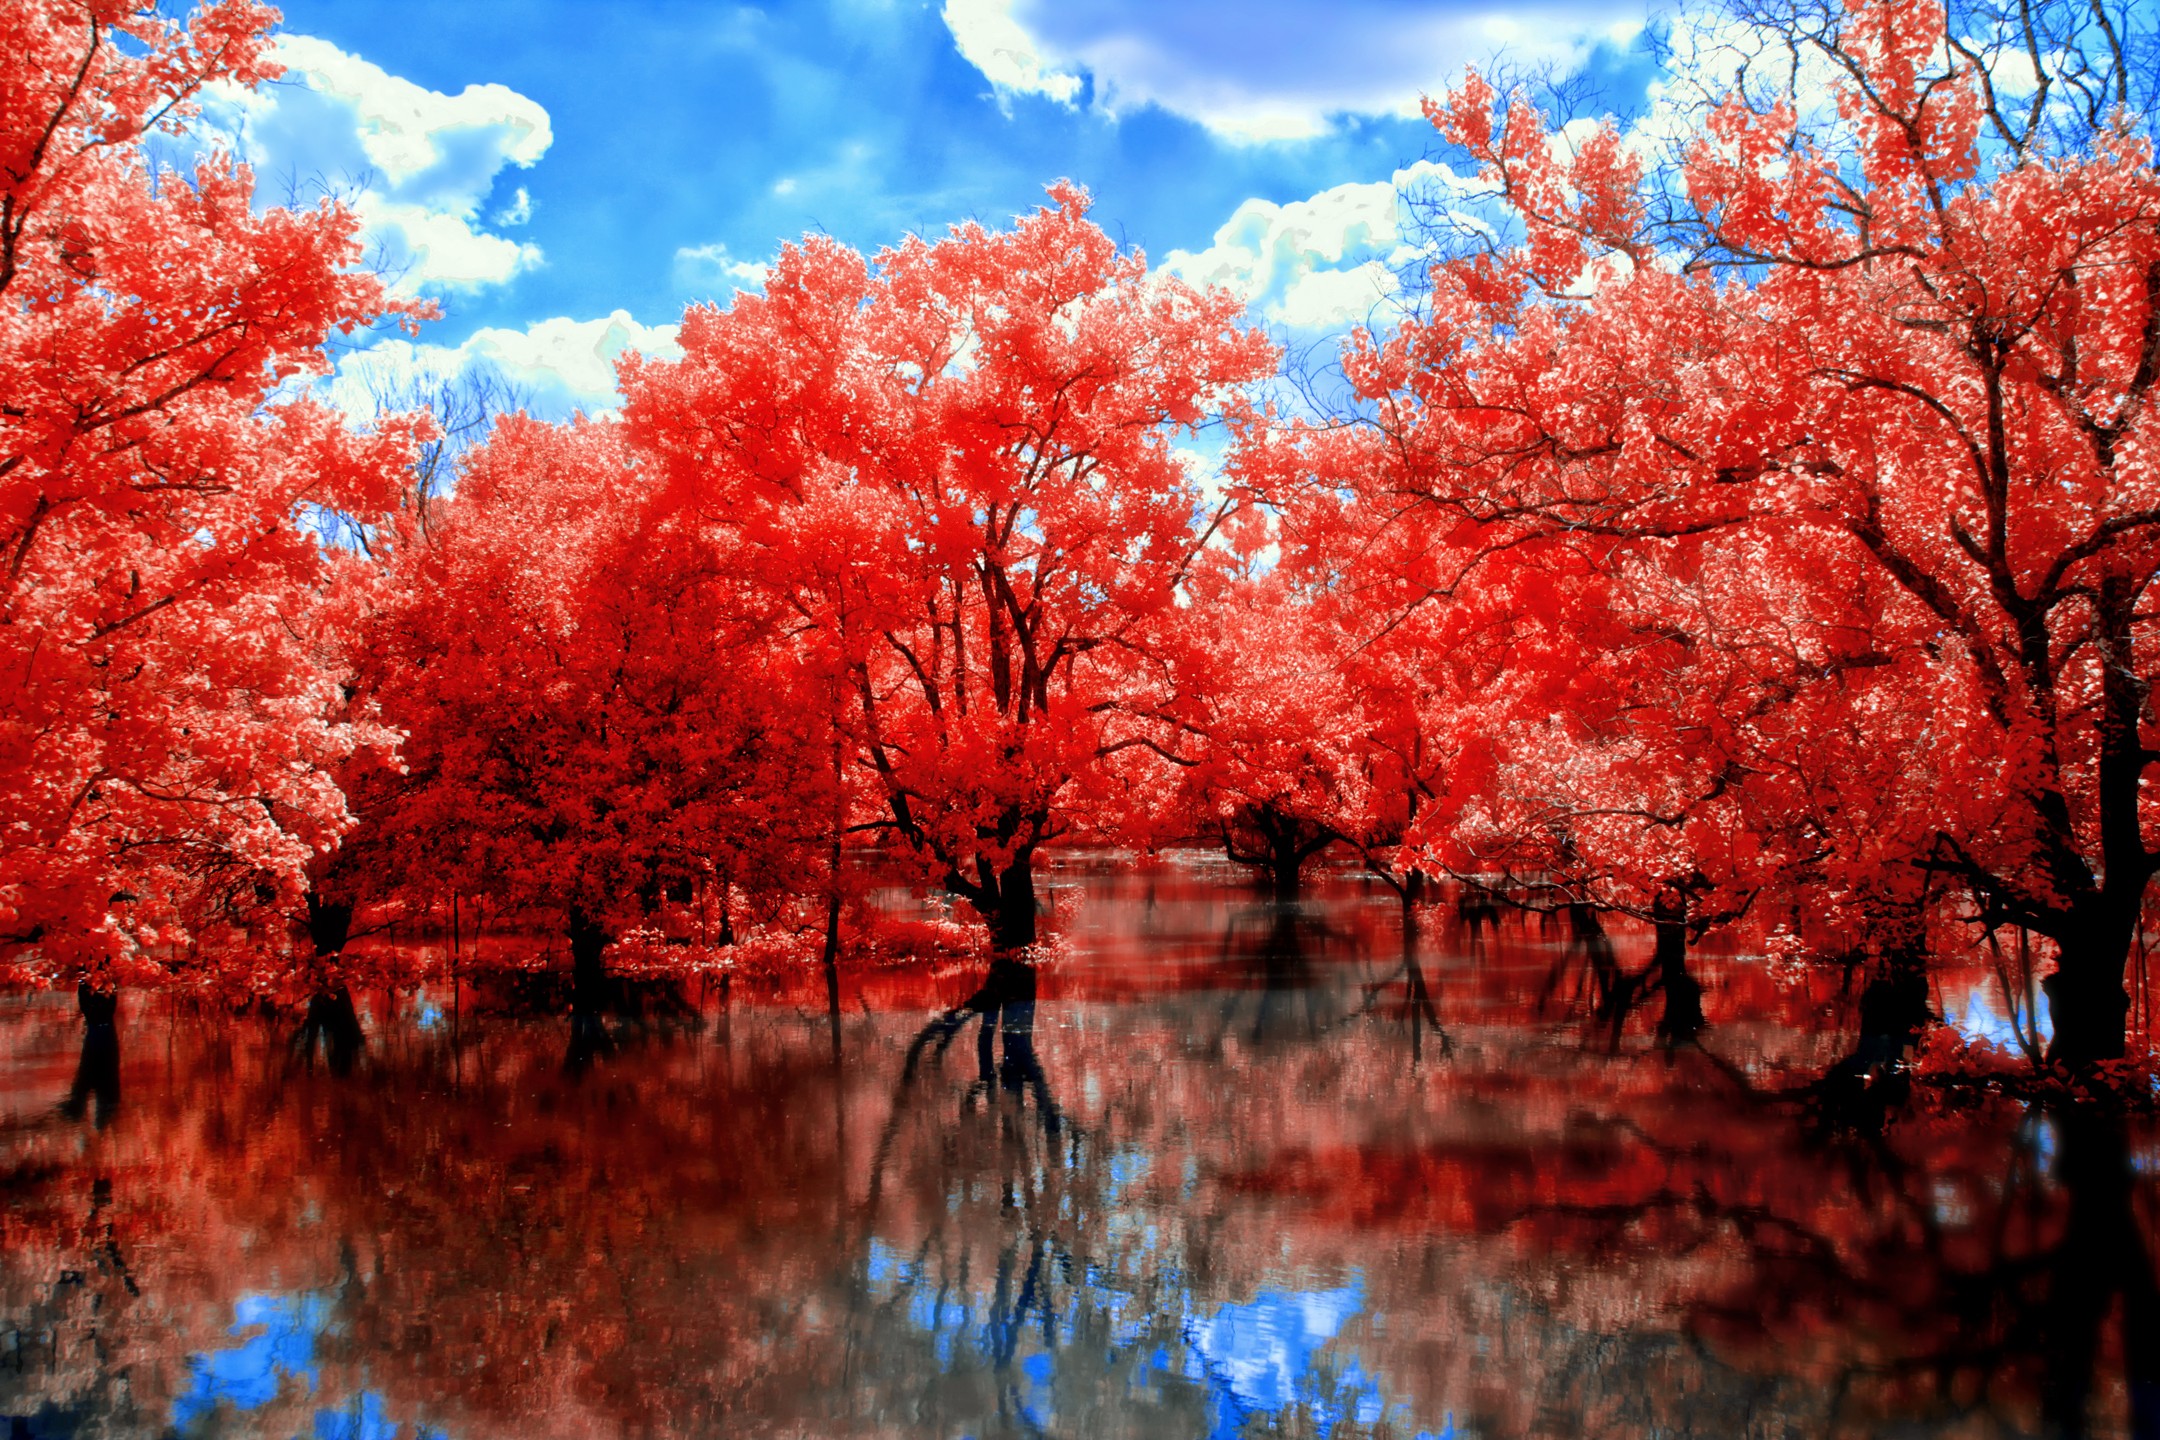 General 2160x1440 nature landscape trees water reflection colorful